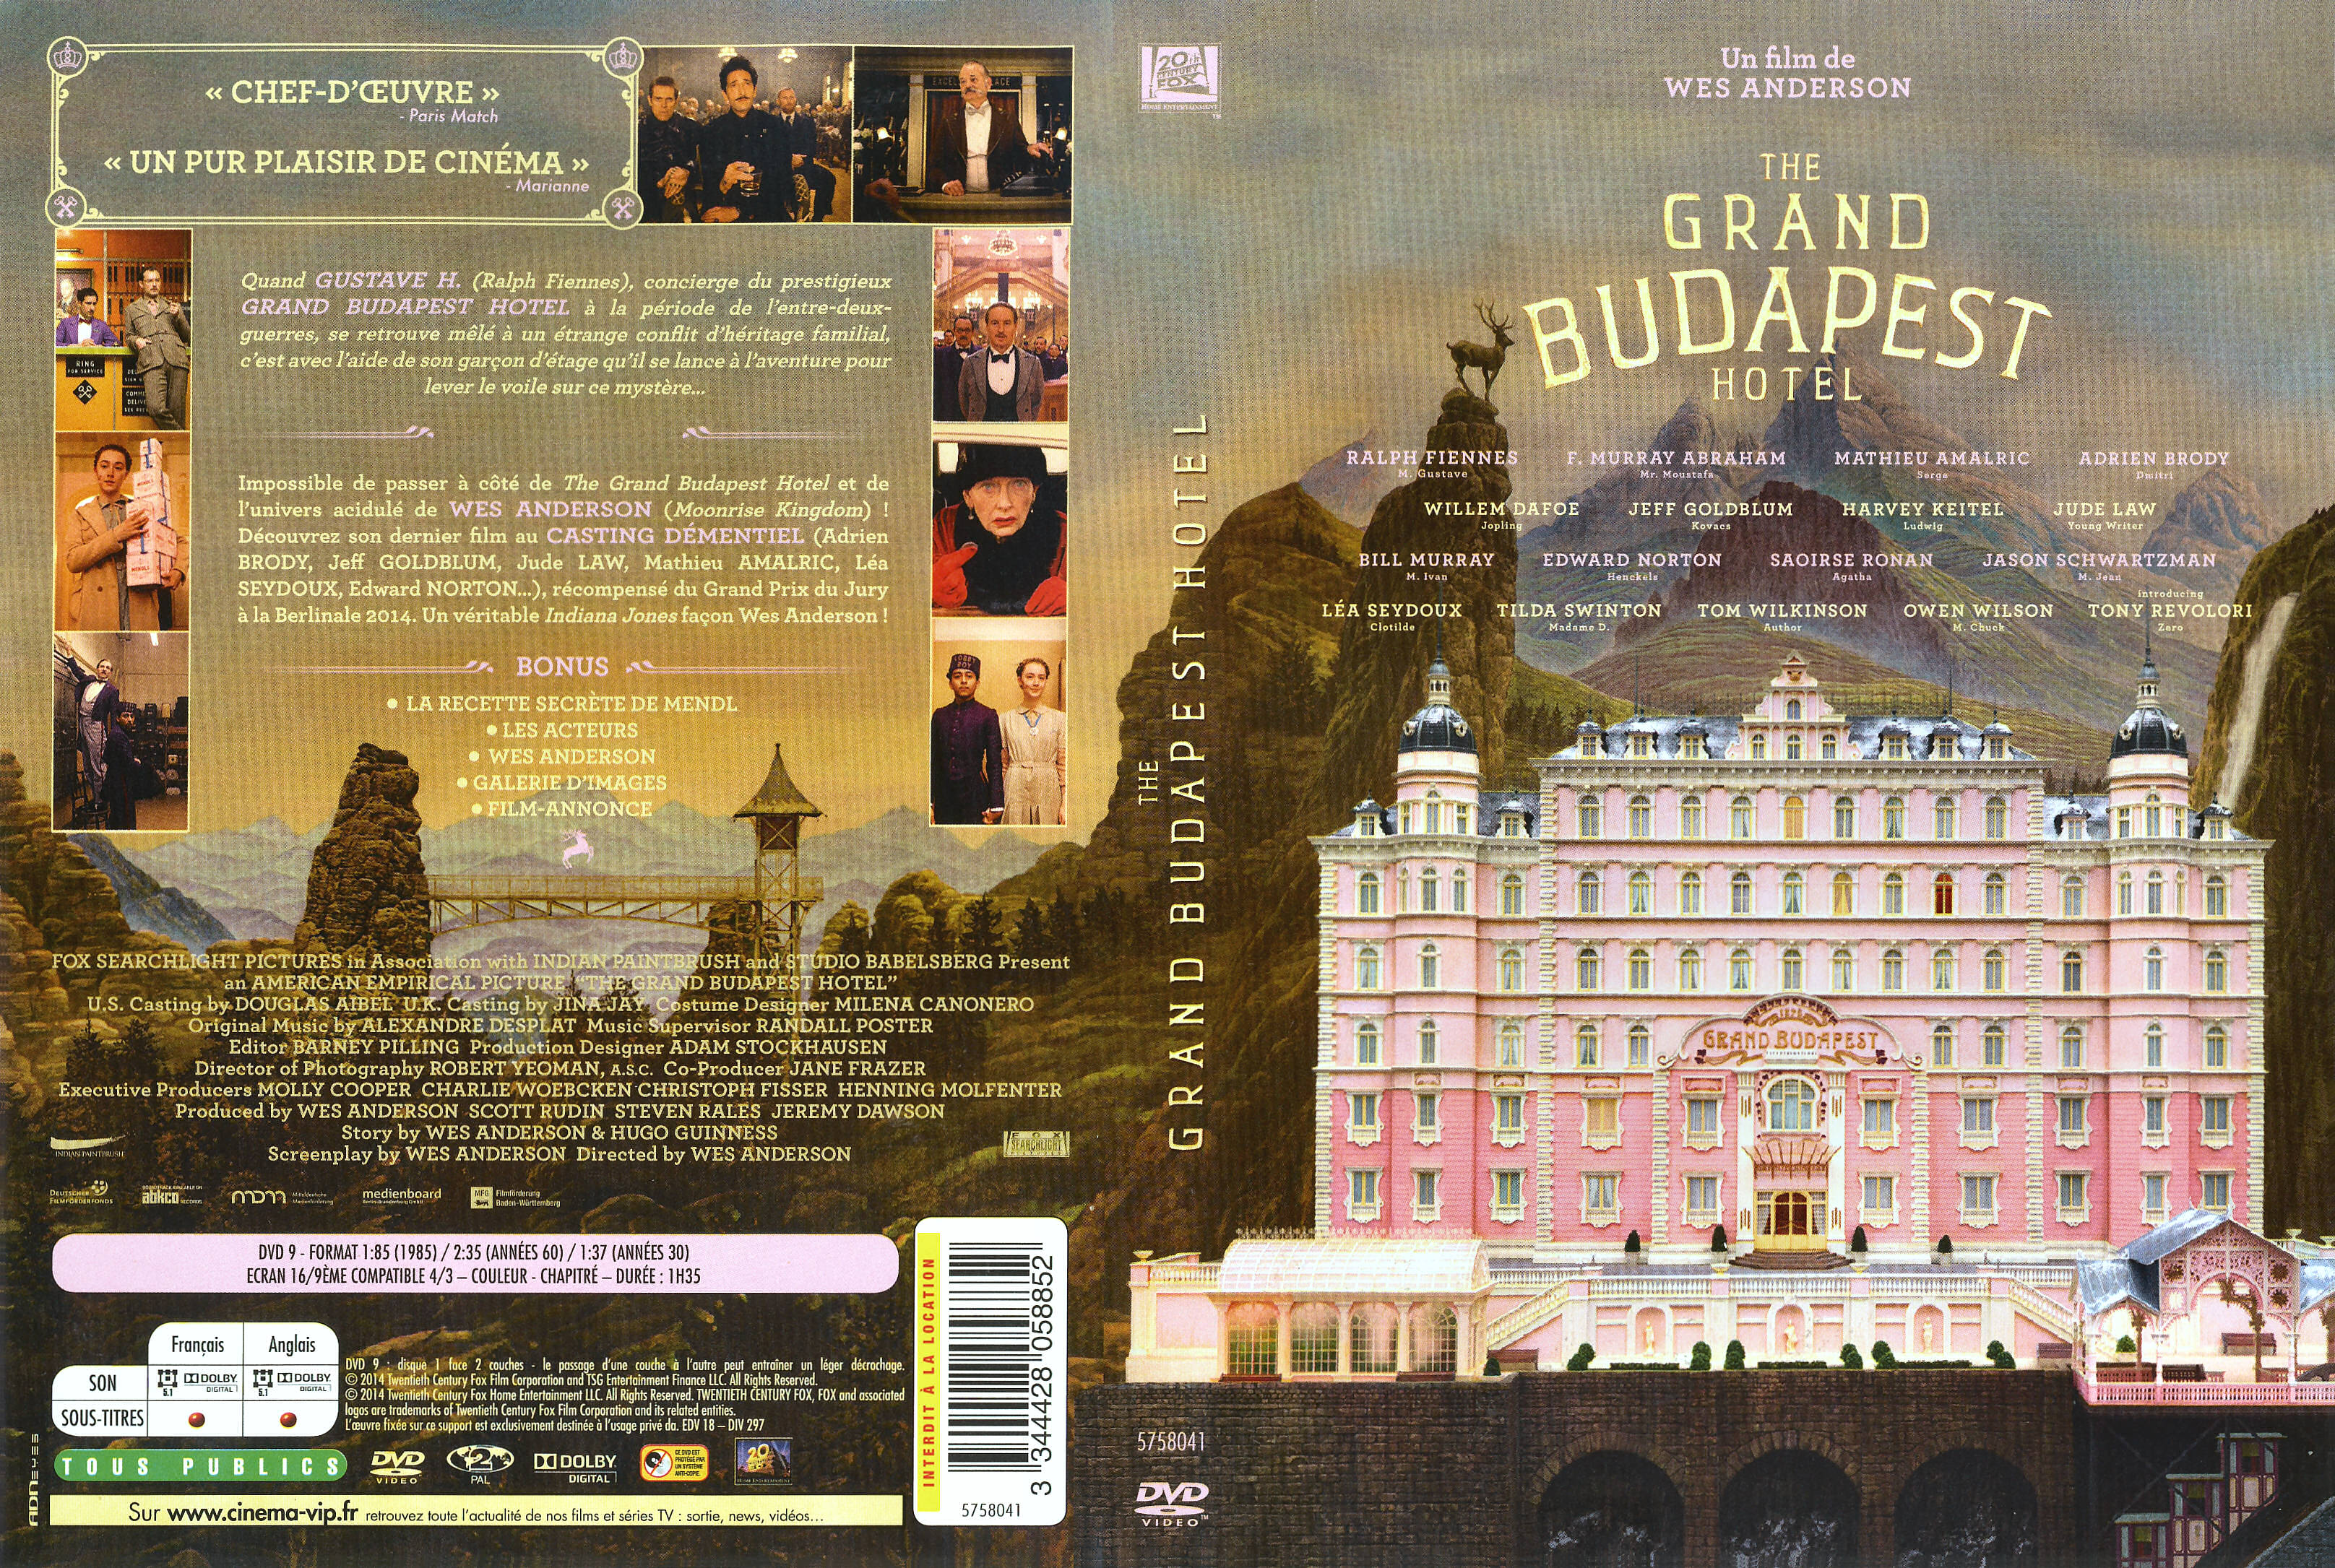 Jaquette DVD The Grand Budapest Hotel